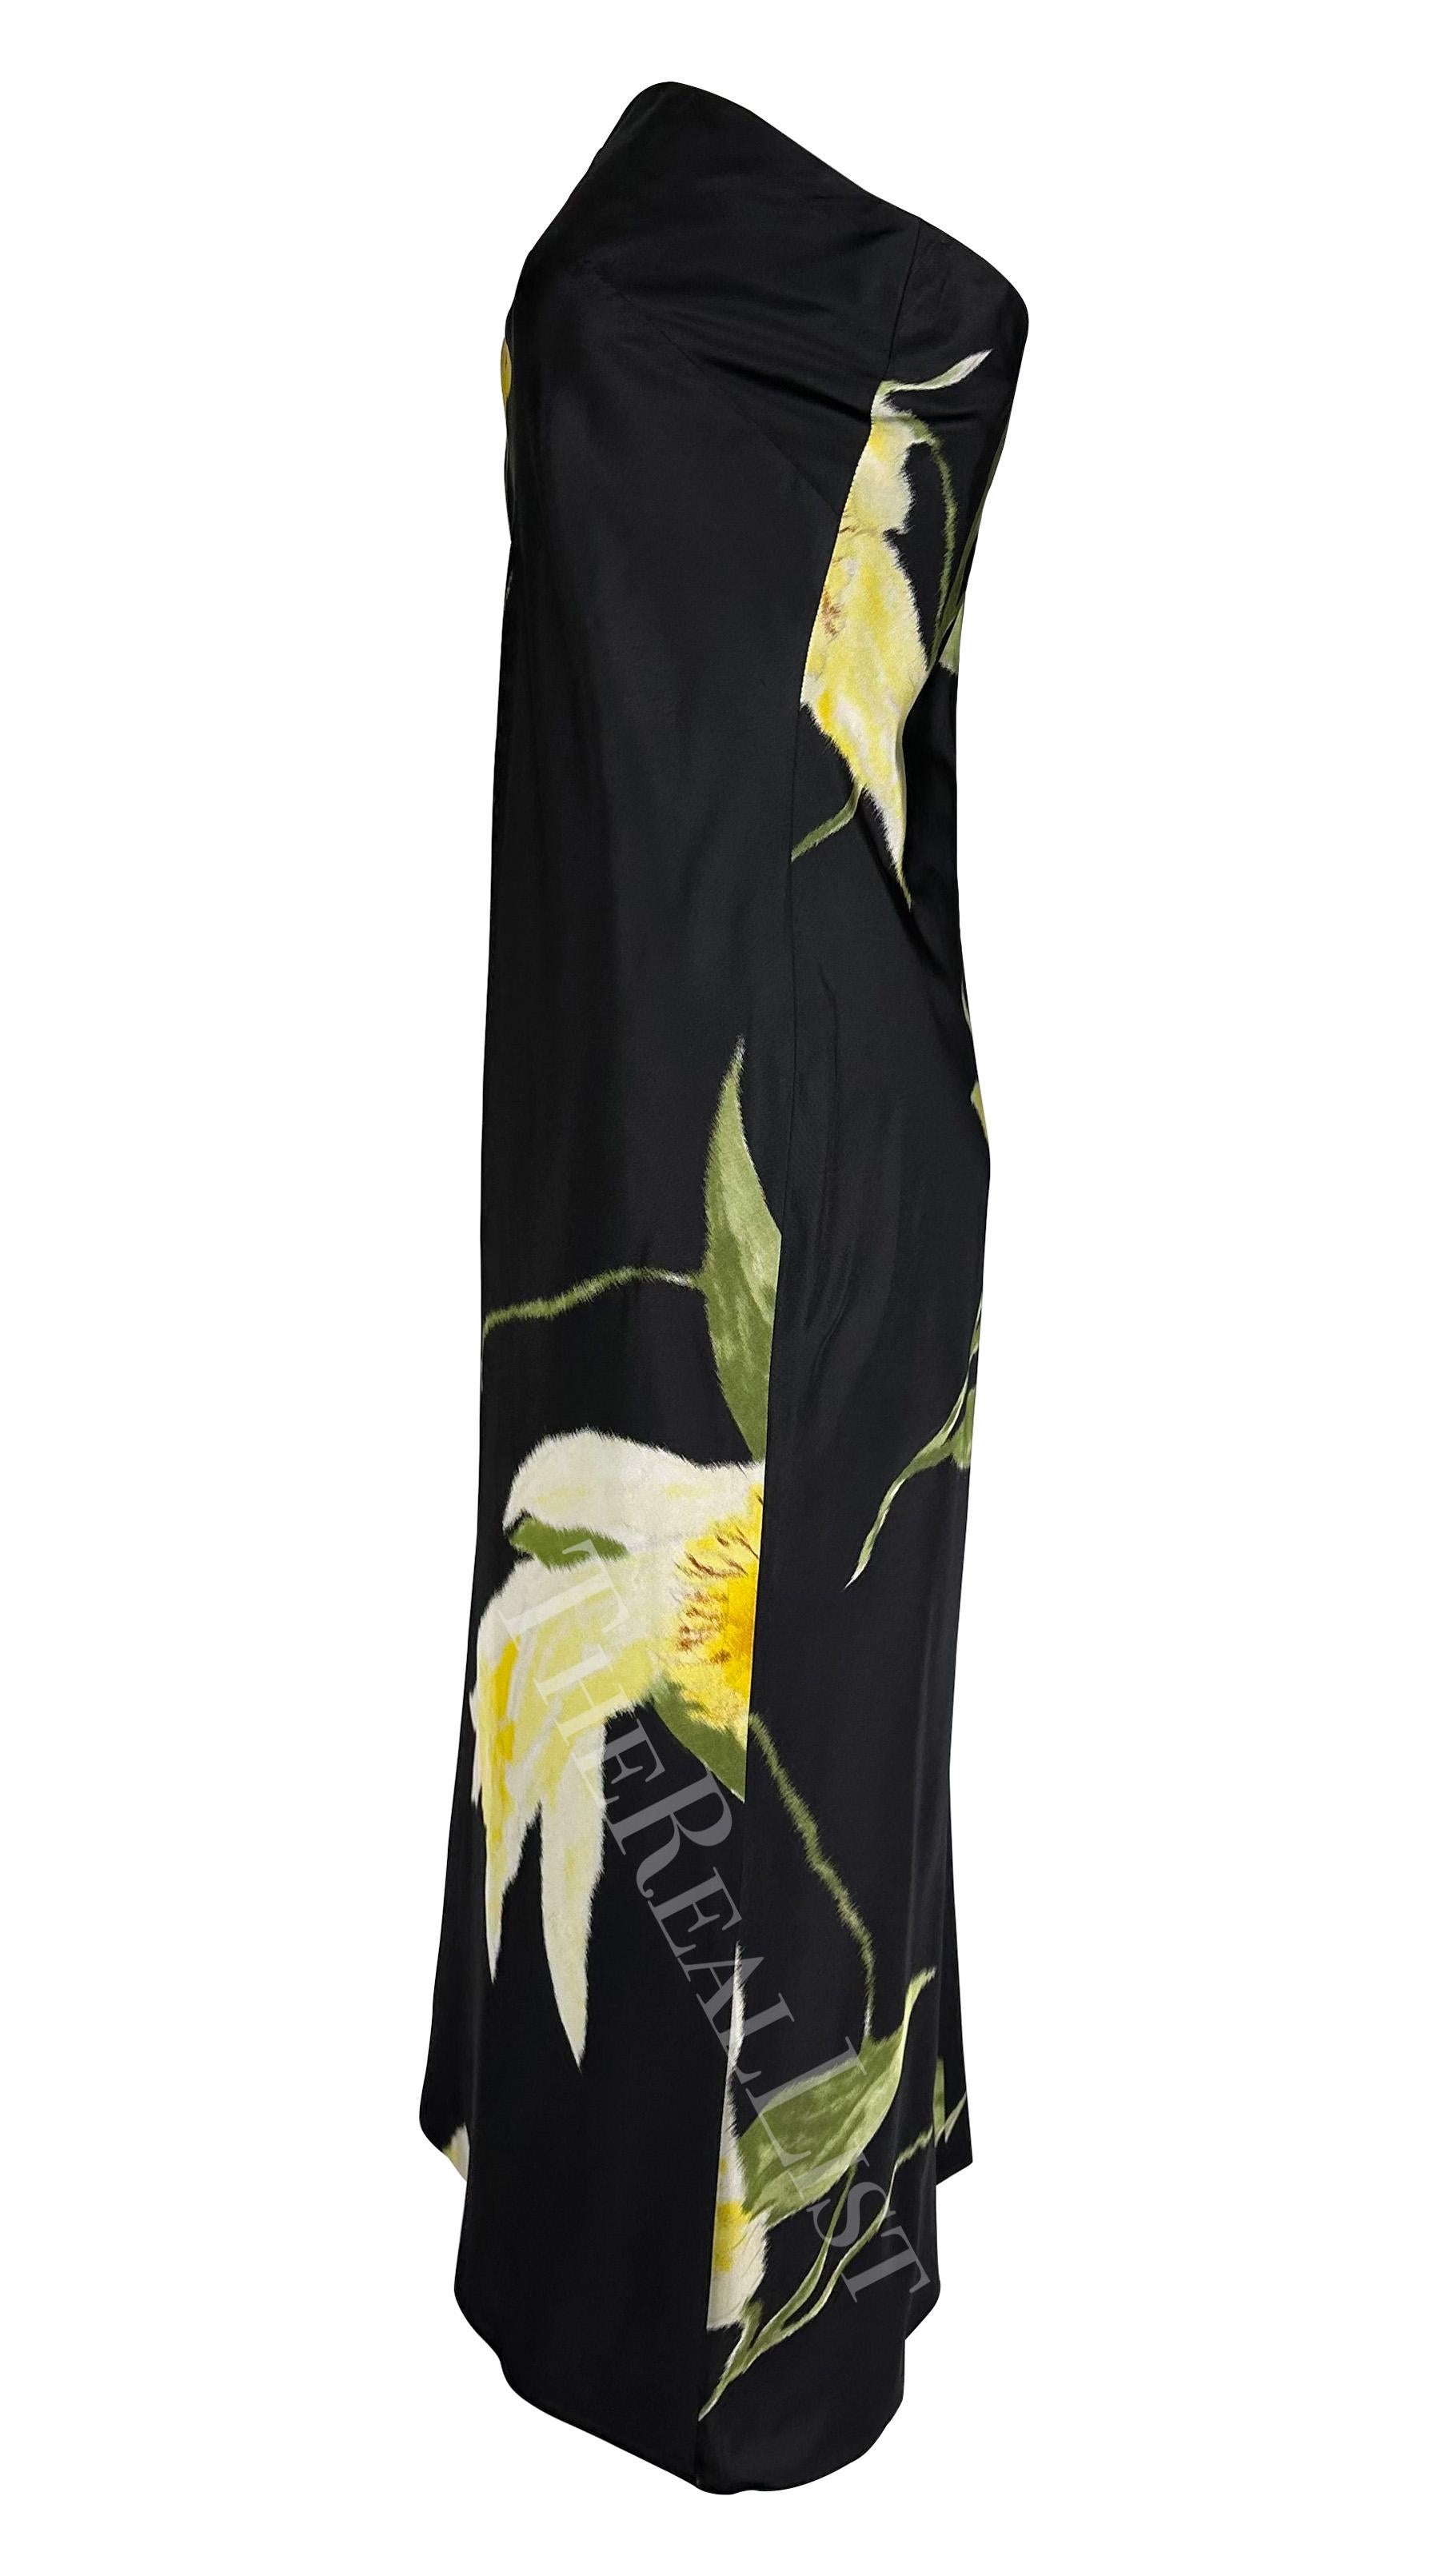 S/S 2000 Ralph Lauren Runway Black Yellow Floral Strapless Cocktail Dress For Sale 3